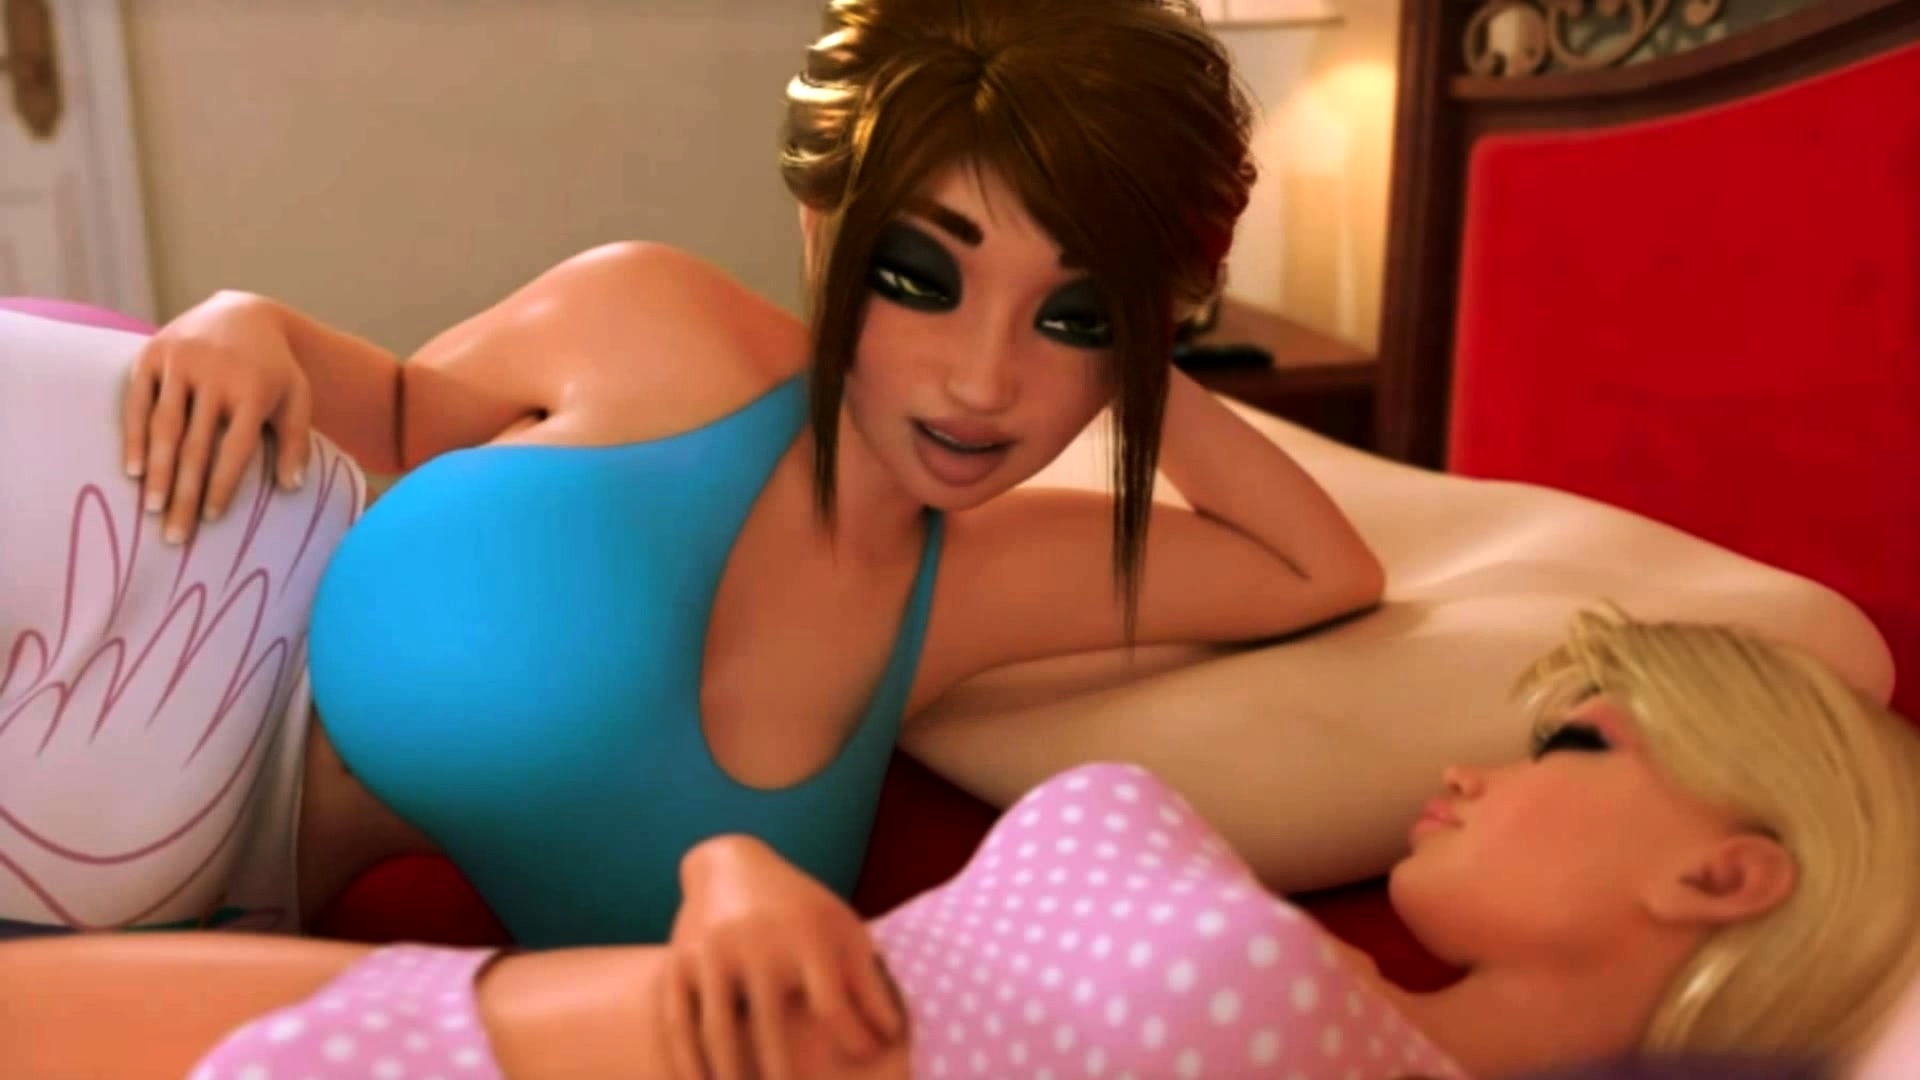 1920px x 1080px - Enjoy Free HD Porn Videos - Futa Mom And Daughters Movie Night - 3d  Animation Eng - - VivaTube.com